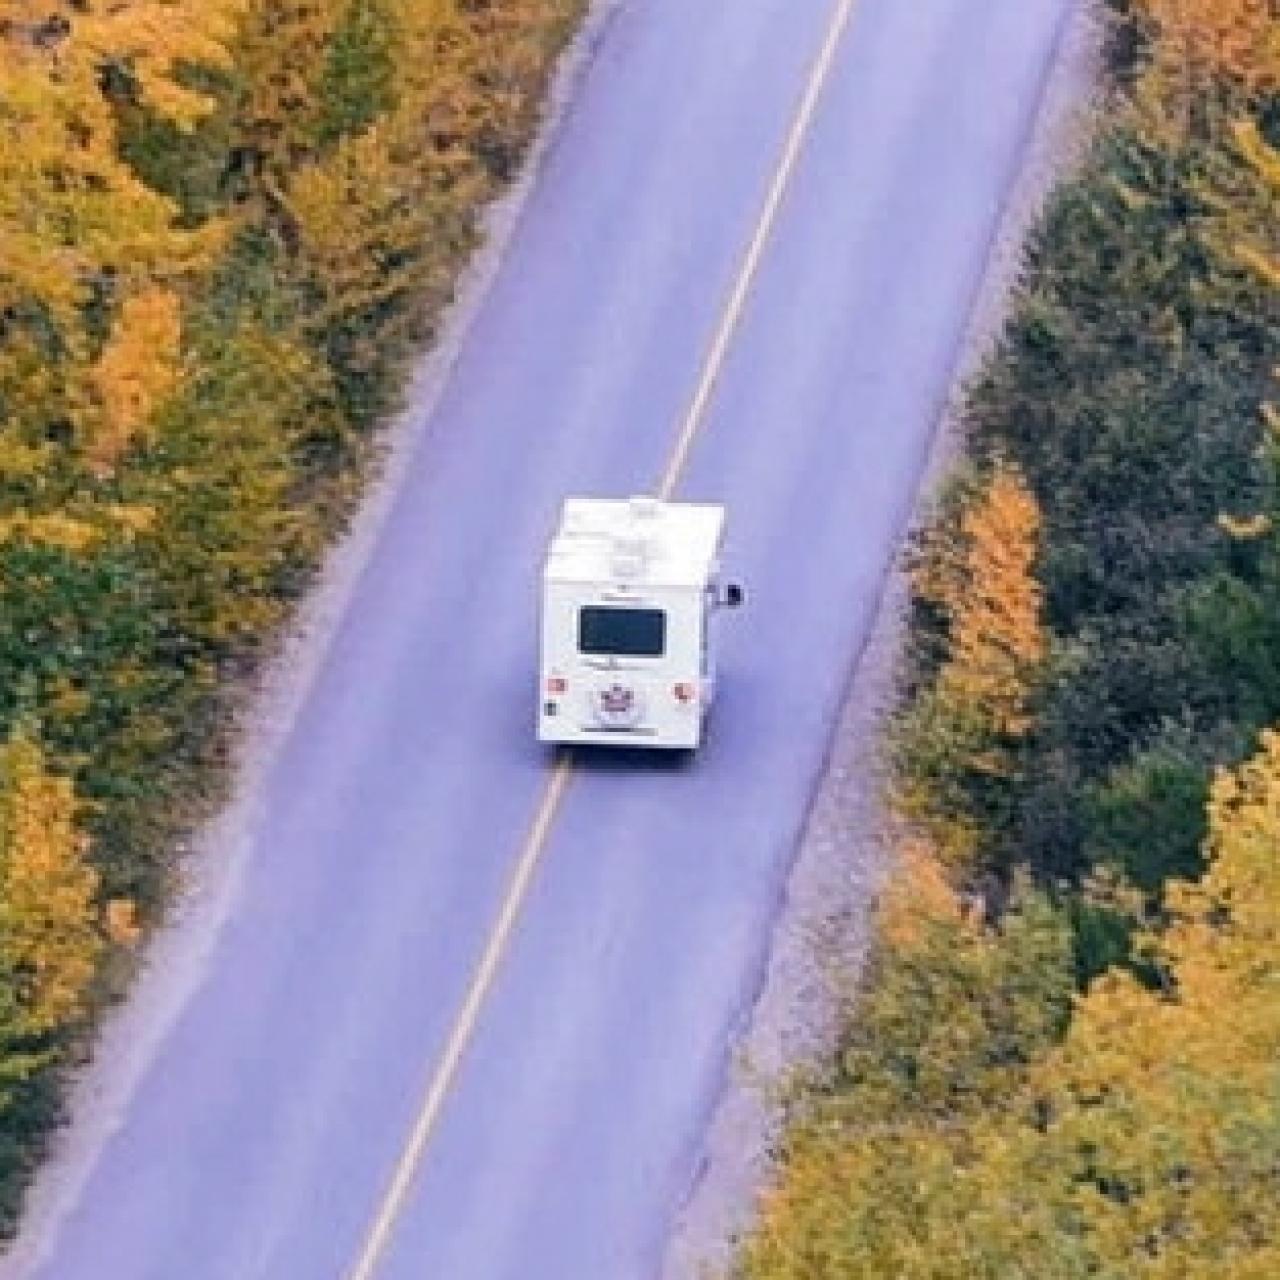 What to look for when buying a used motorhome